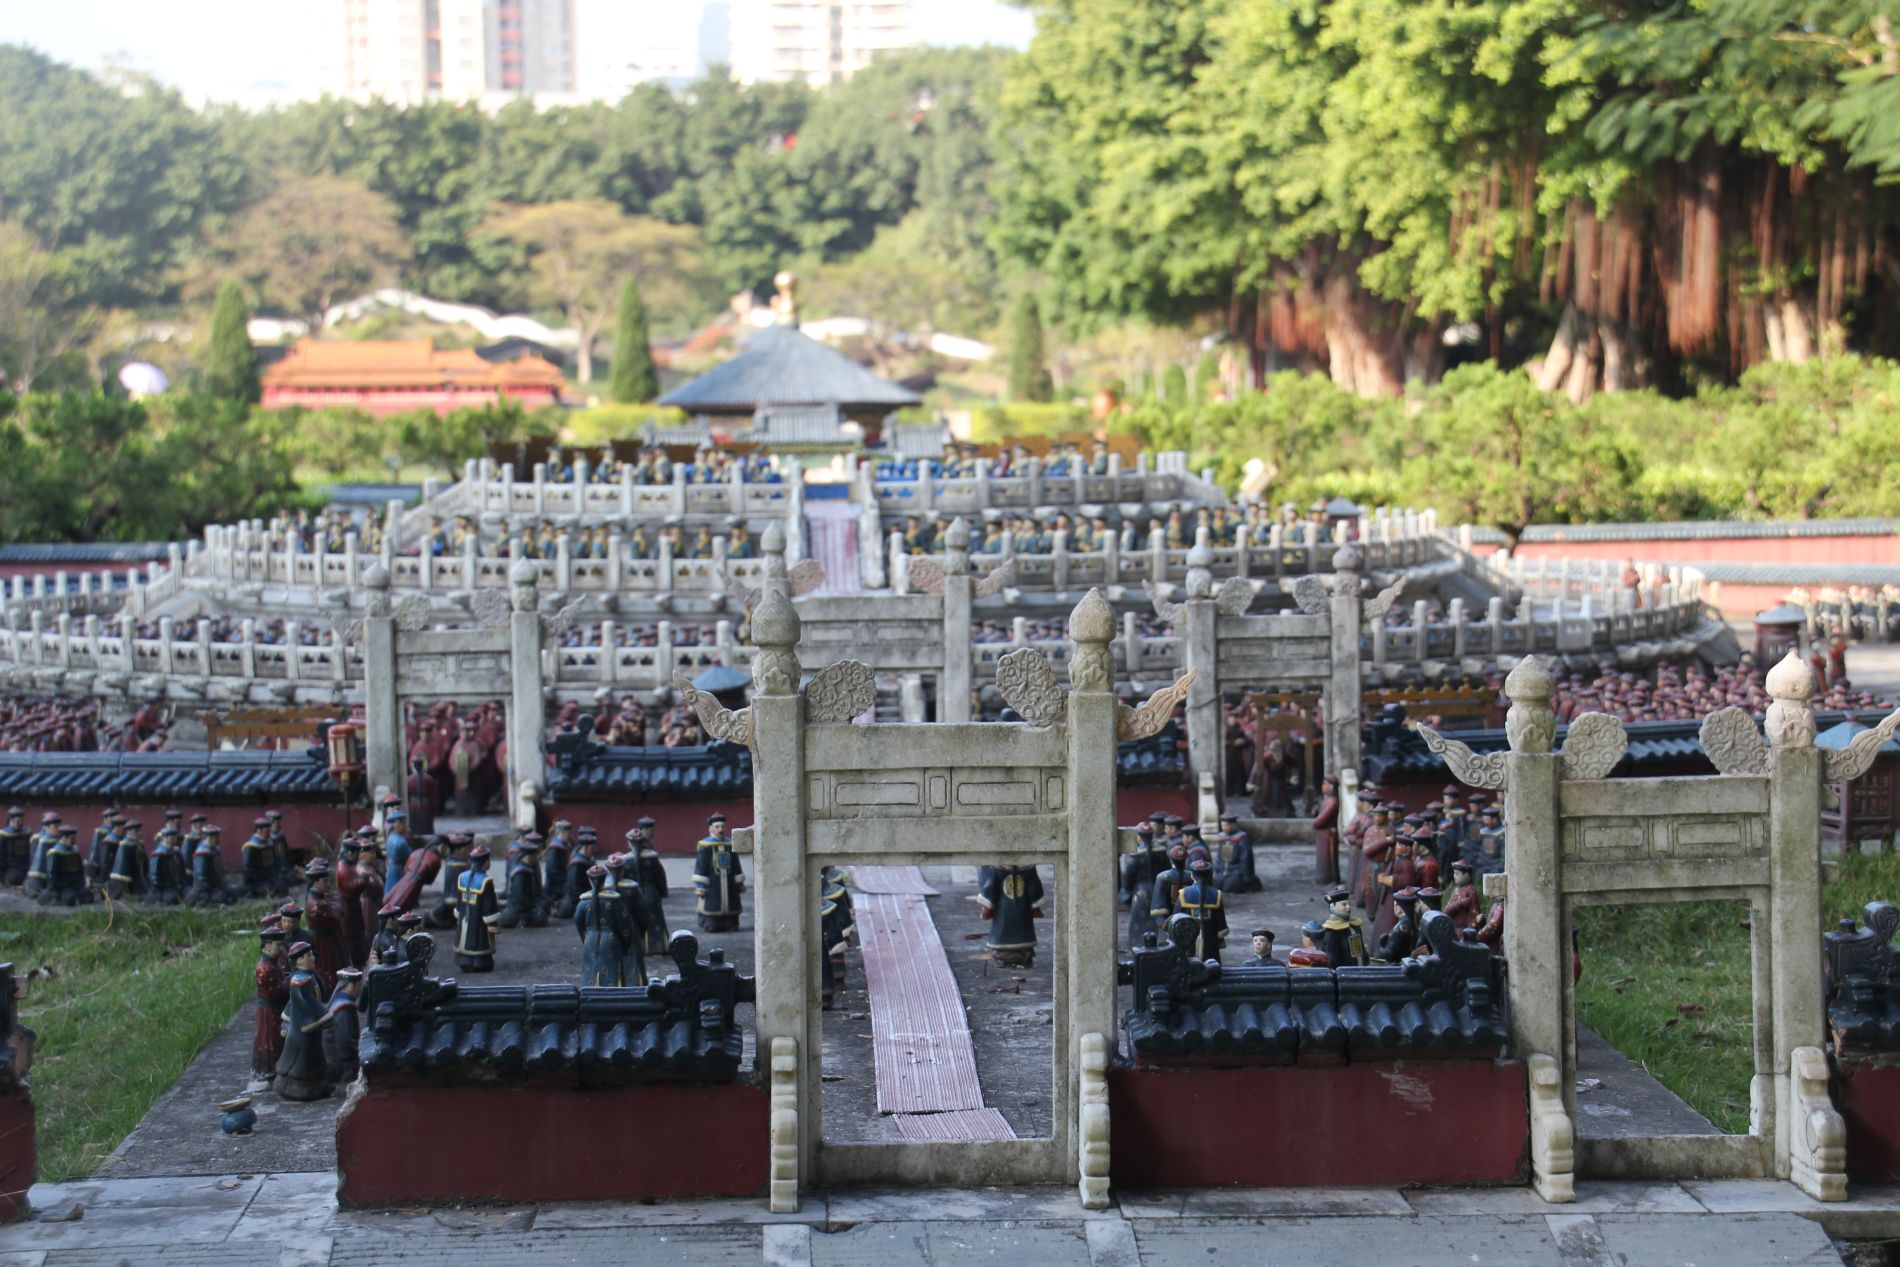 A miniature, hand-crafted Temple of Heaven is on display in Splendid China, Shenzhen.